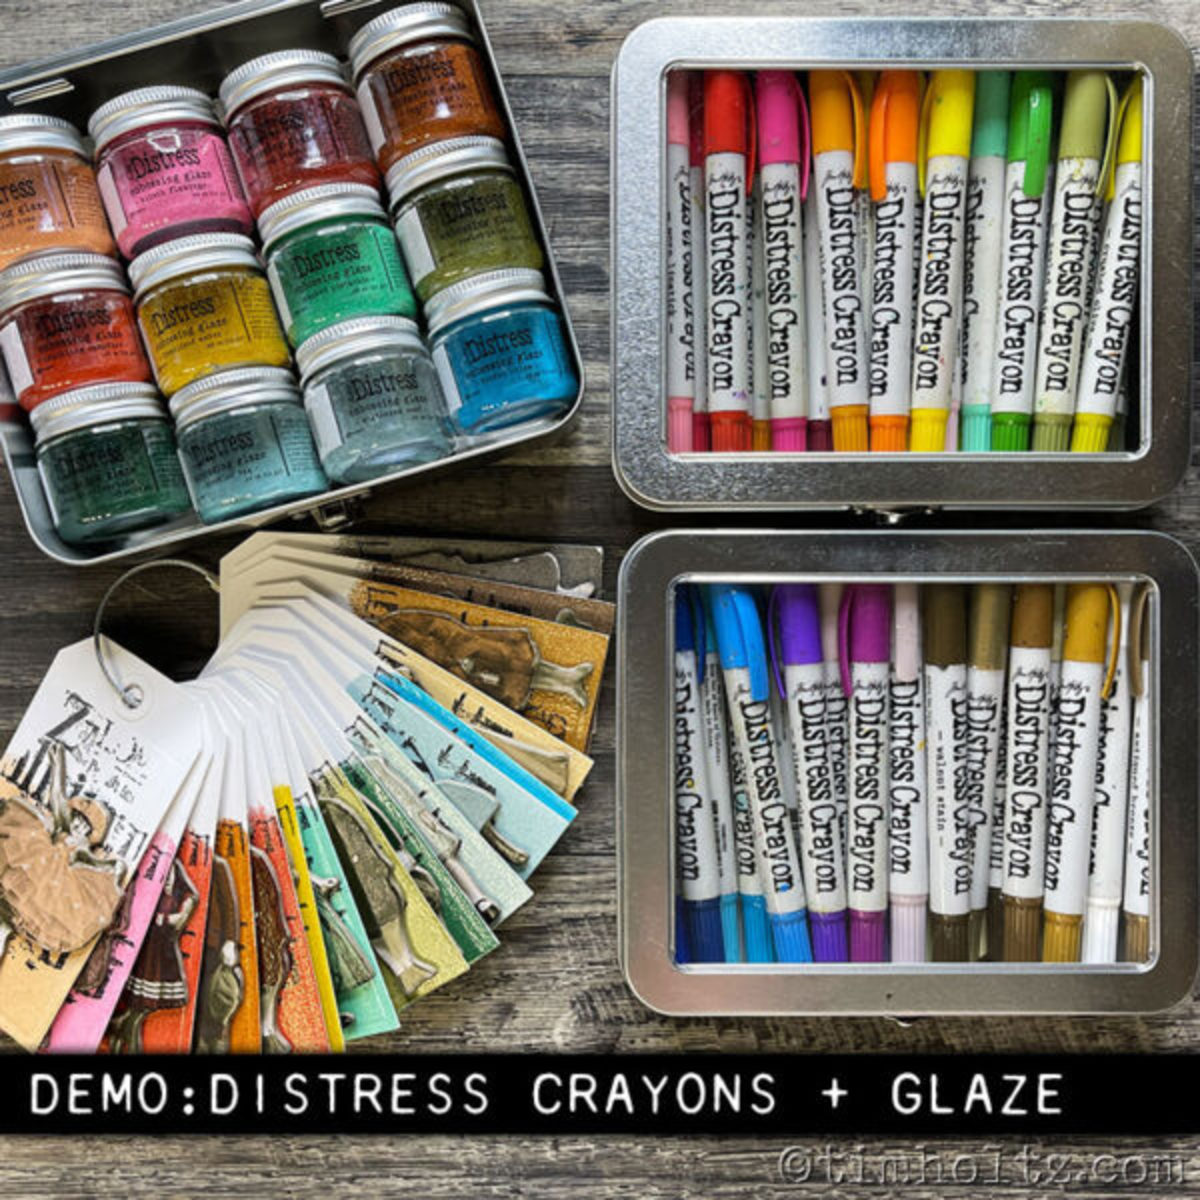 Use distress crayons with embossing glaze.